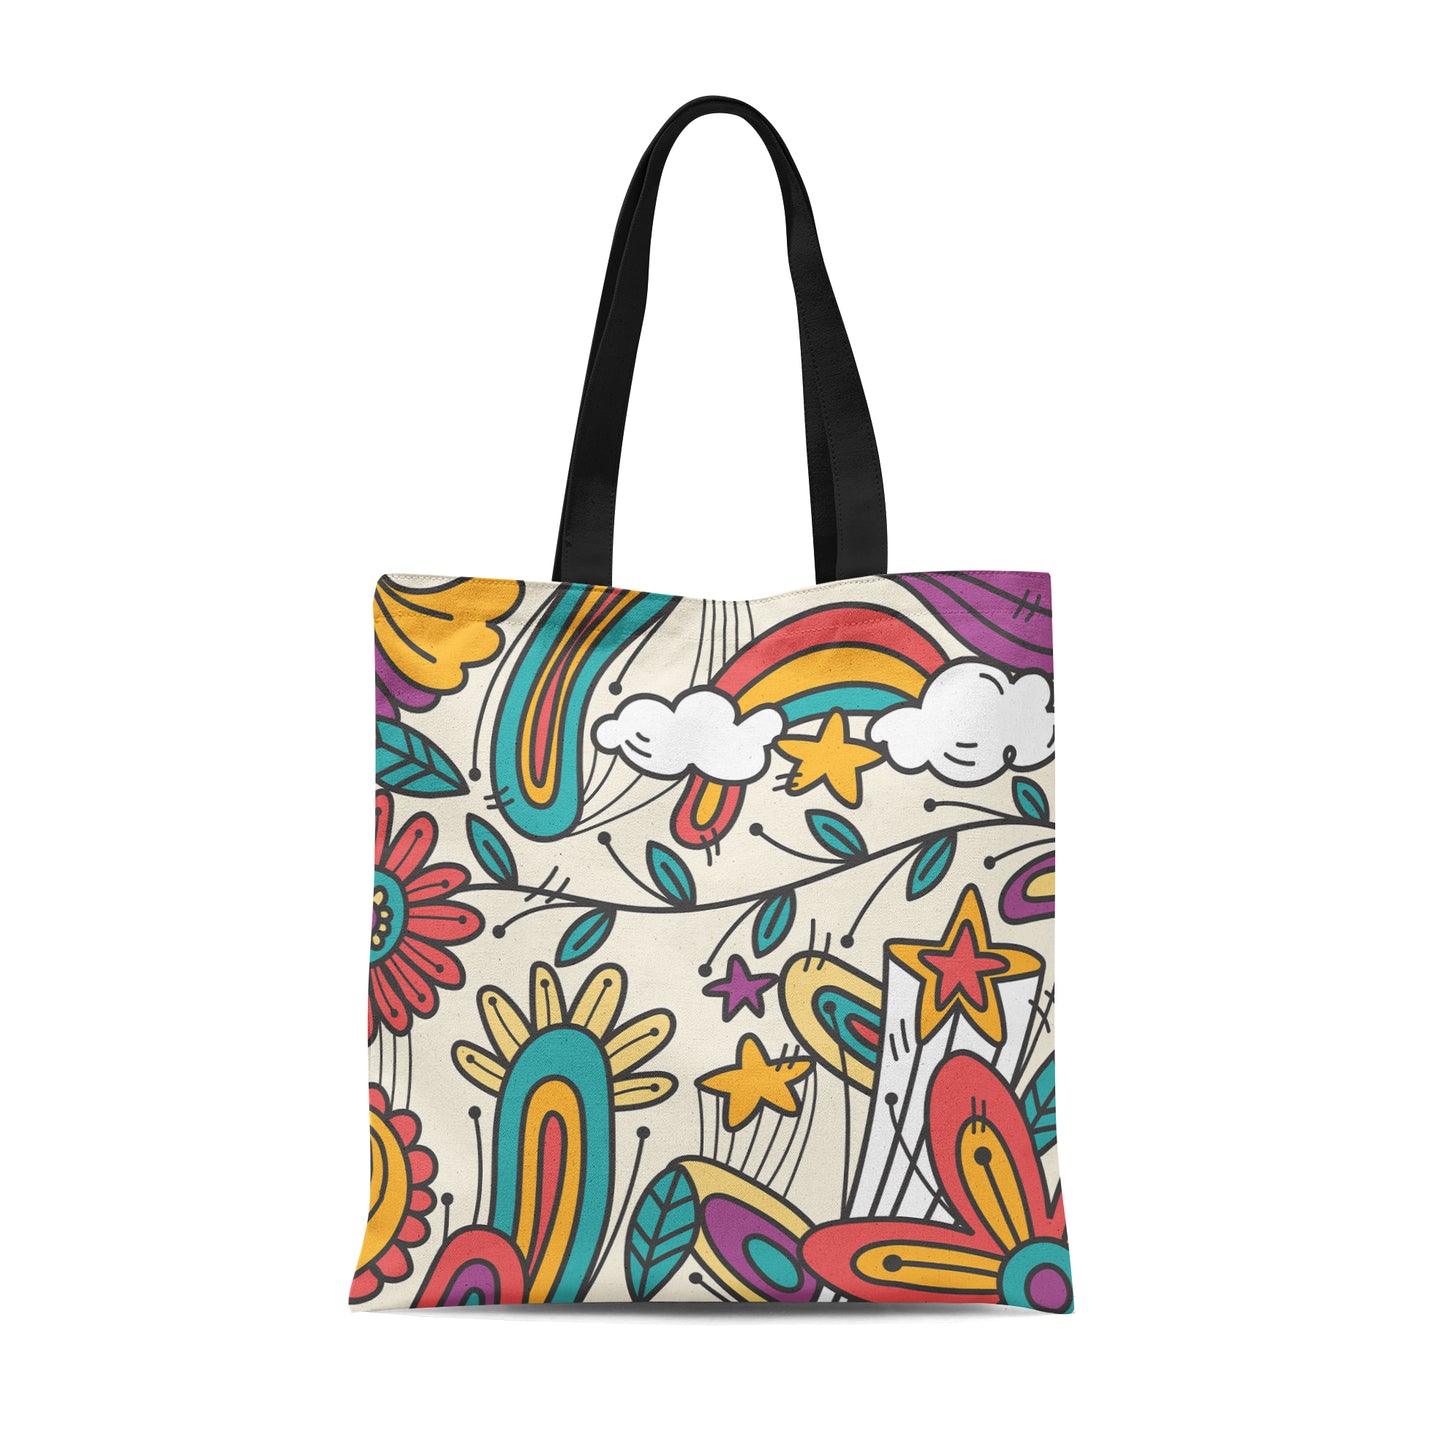 Psychedelic Groovy Tote Bag